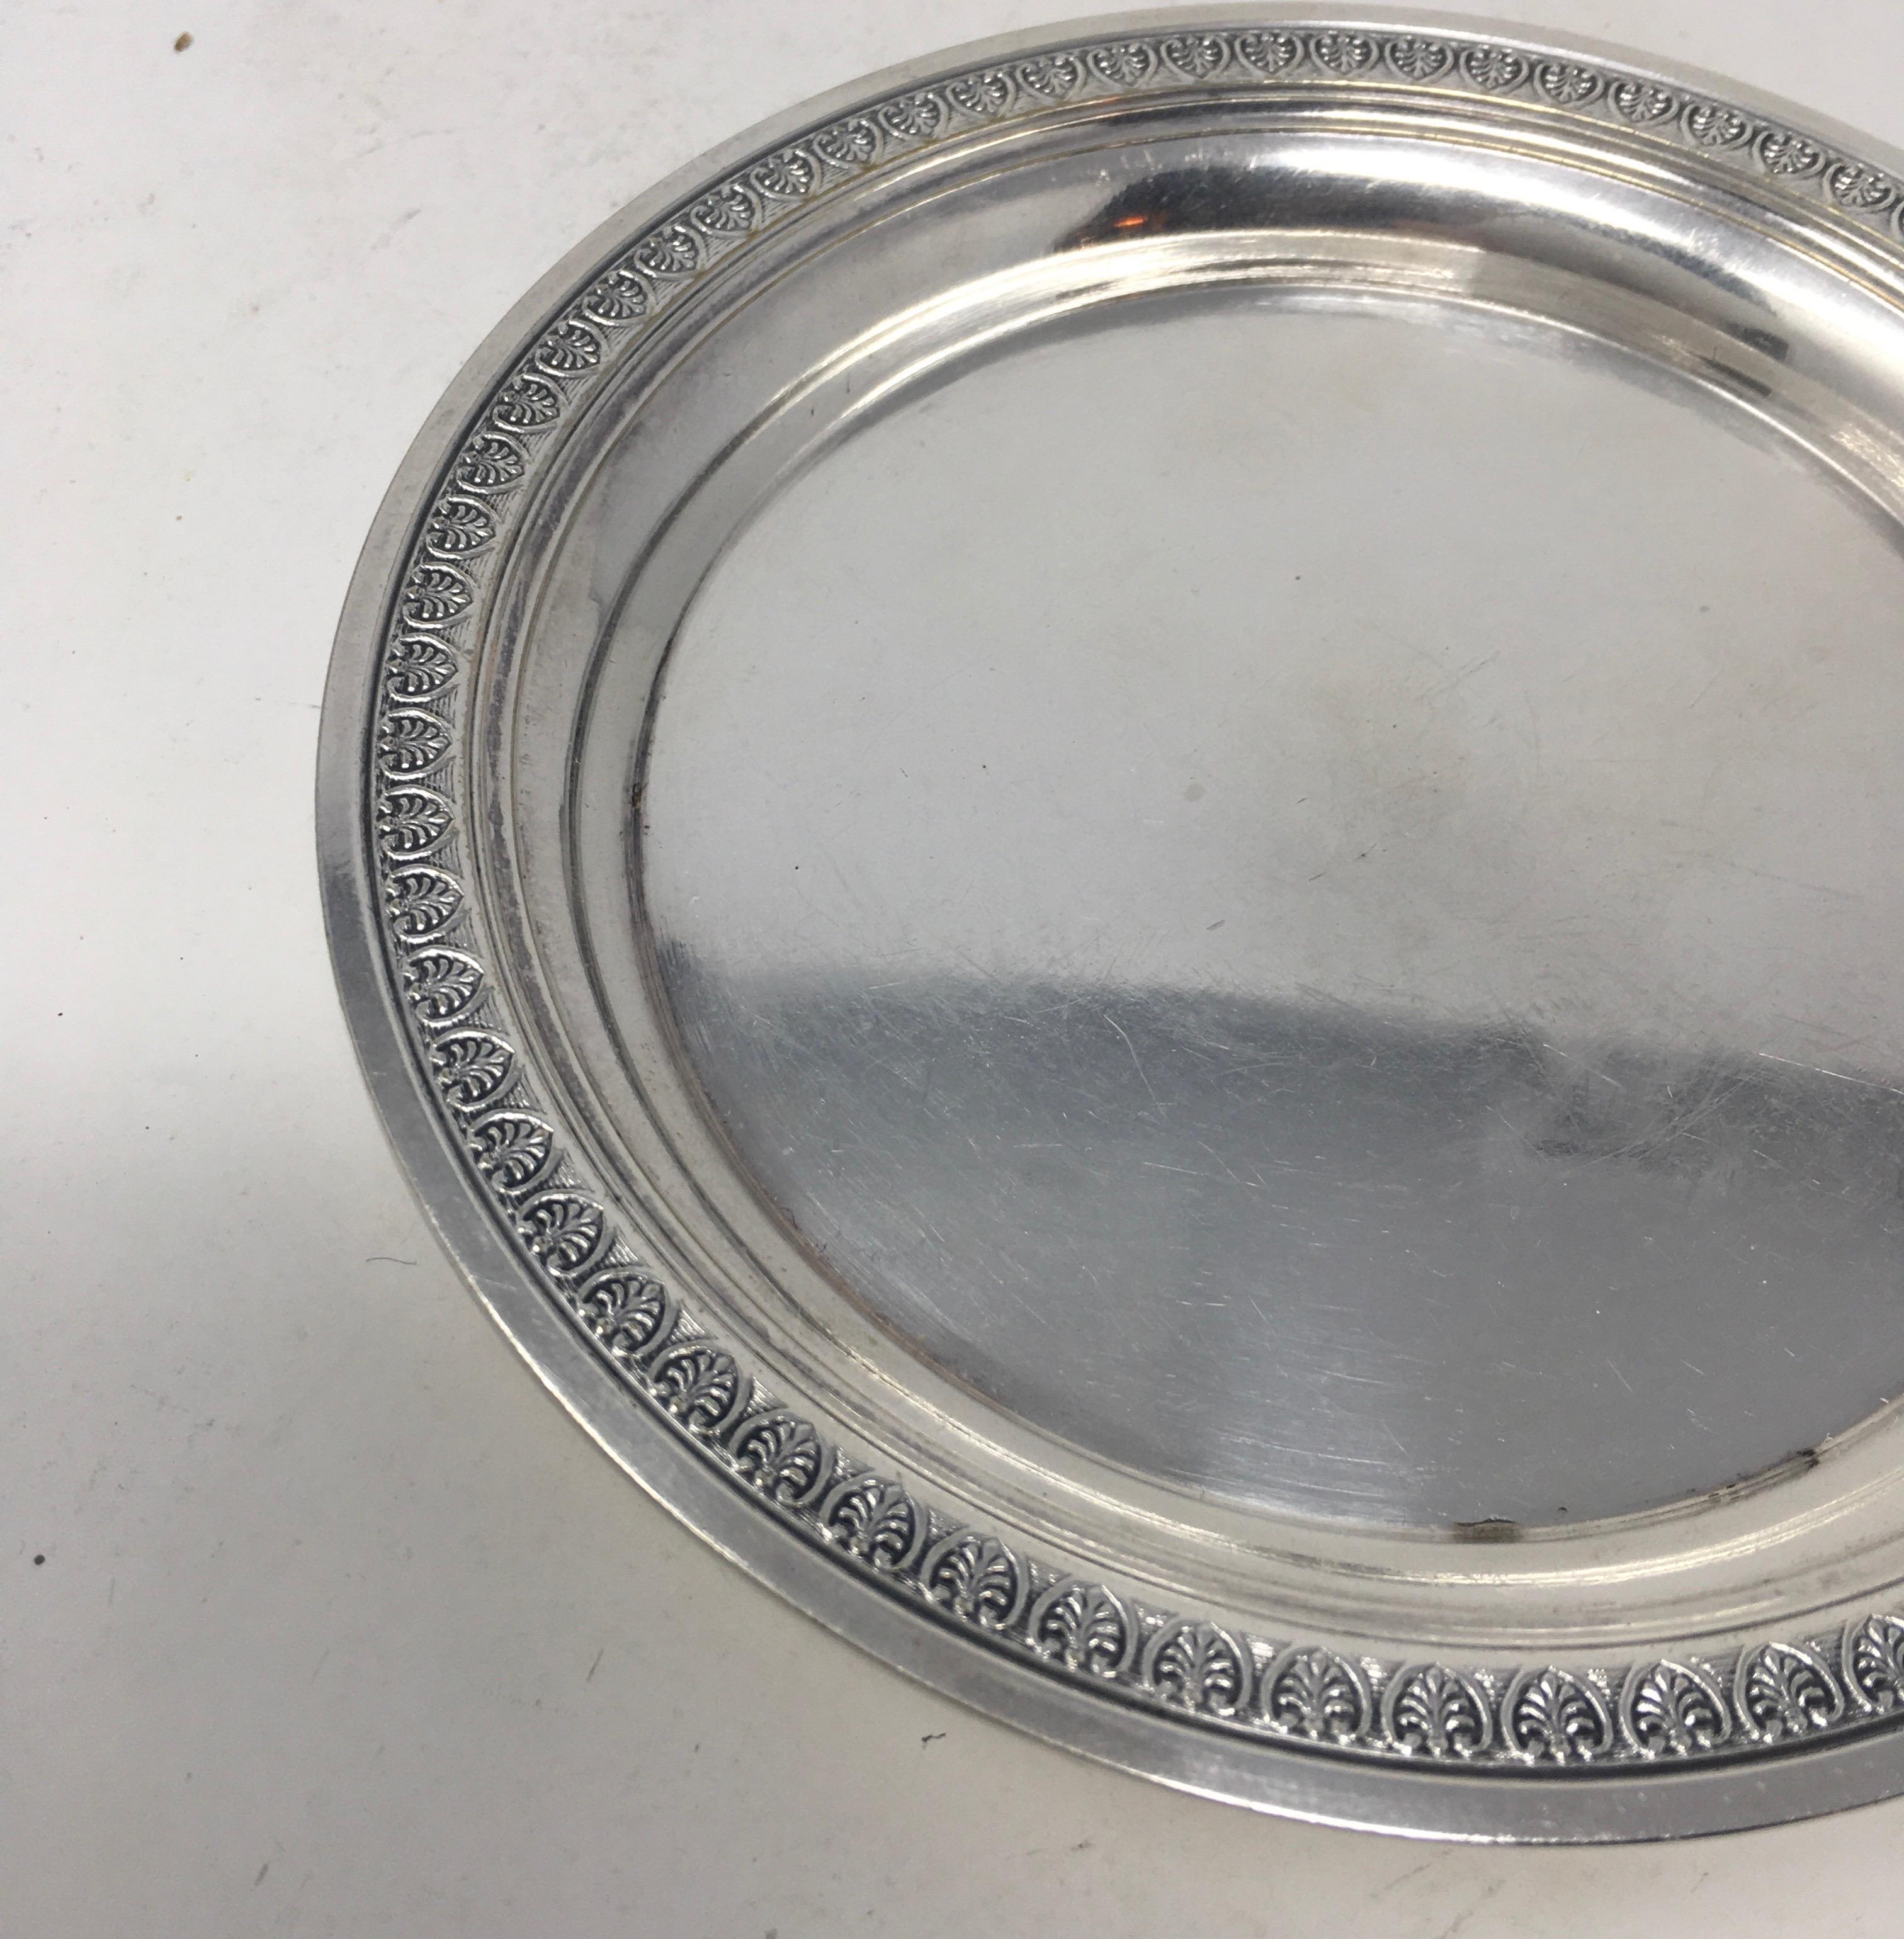 Found in France, this vintage Christofle hotel silver serving platter with beautifully detailed edge, is stamped Christofle on the bottom and has a great aged patina. It would be wonderful in a cabinet and a great addition to your table or buffet.